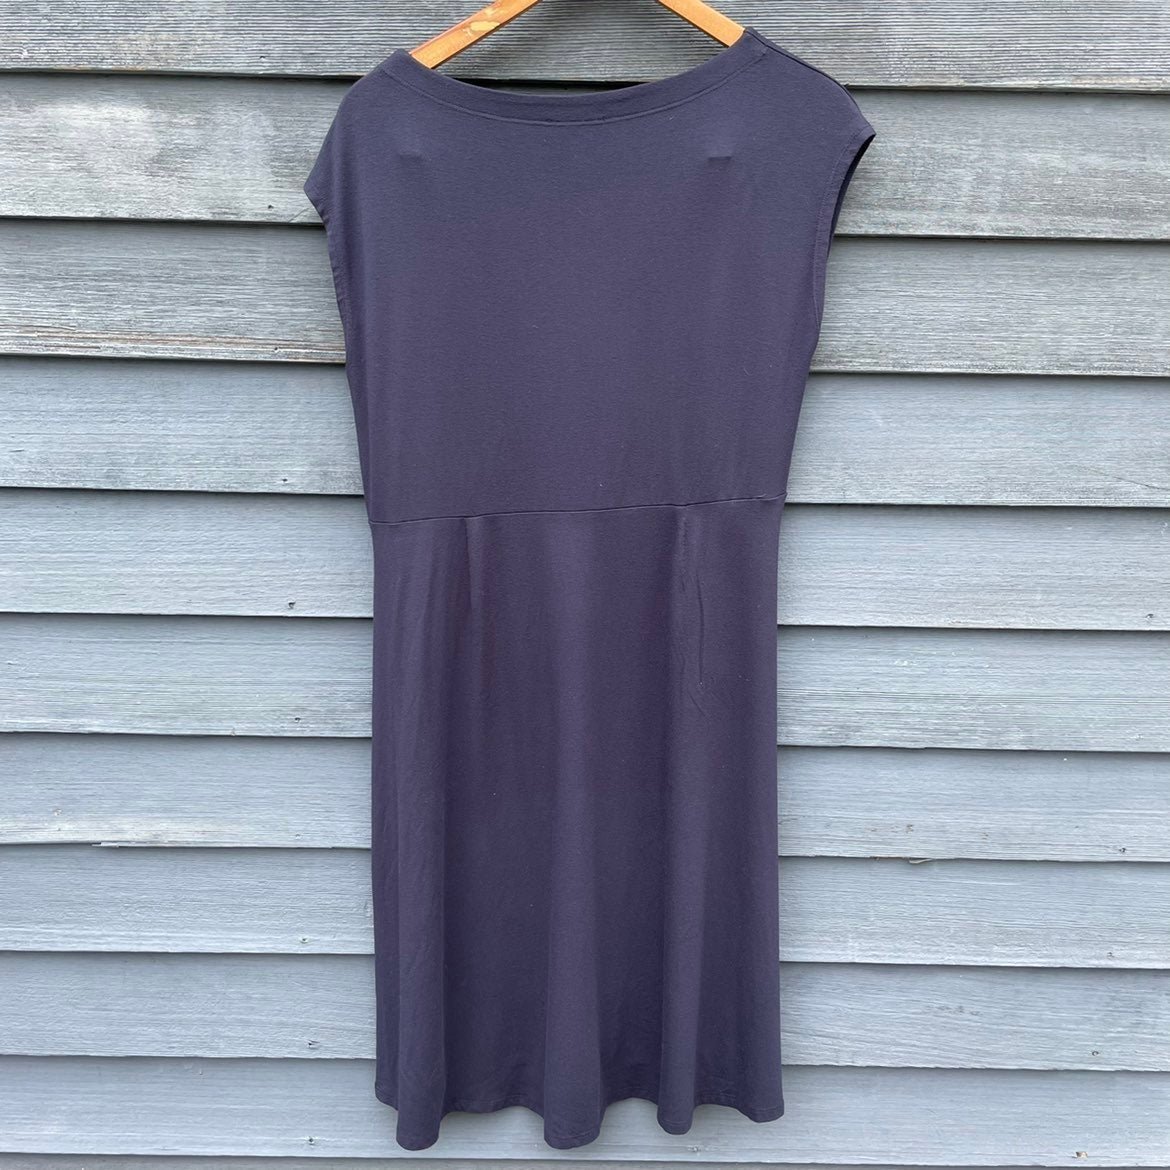 where to buy  Eileen Fisher Navy Blue Dress size Medium iY7Ti7vX5 Online Exclusive